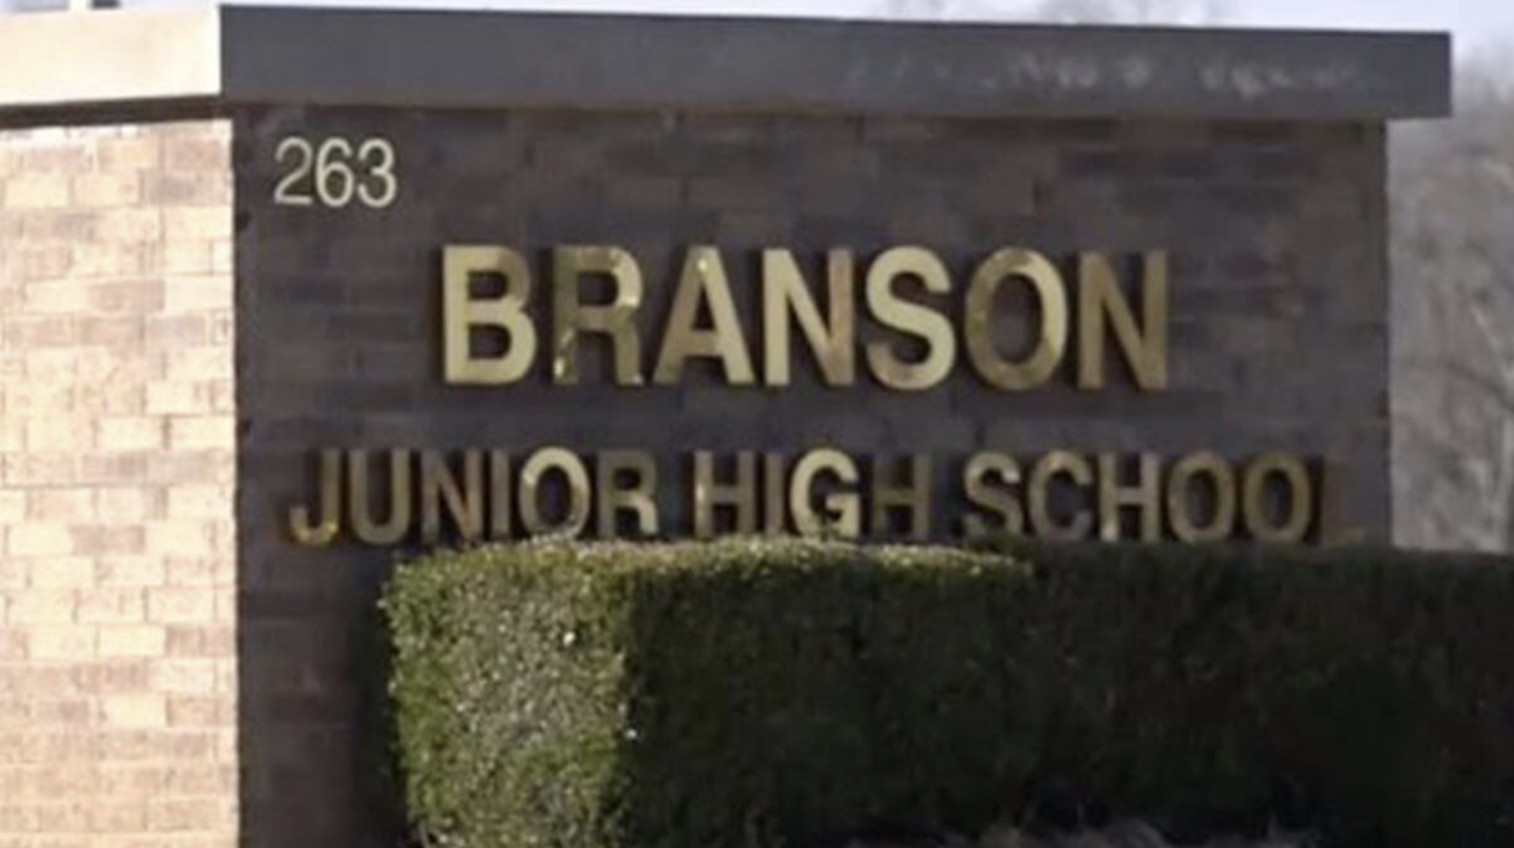 Branson, Missouri Schools Announce Student Arrested Who Brought Loaded Gun to School